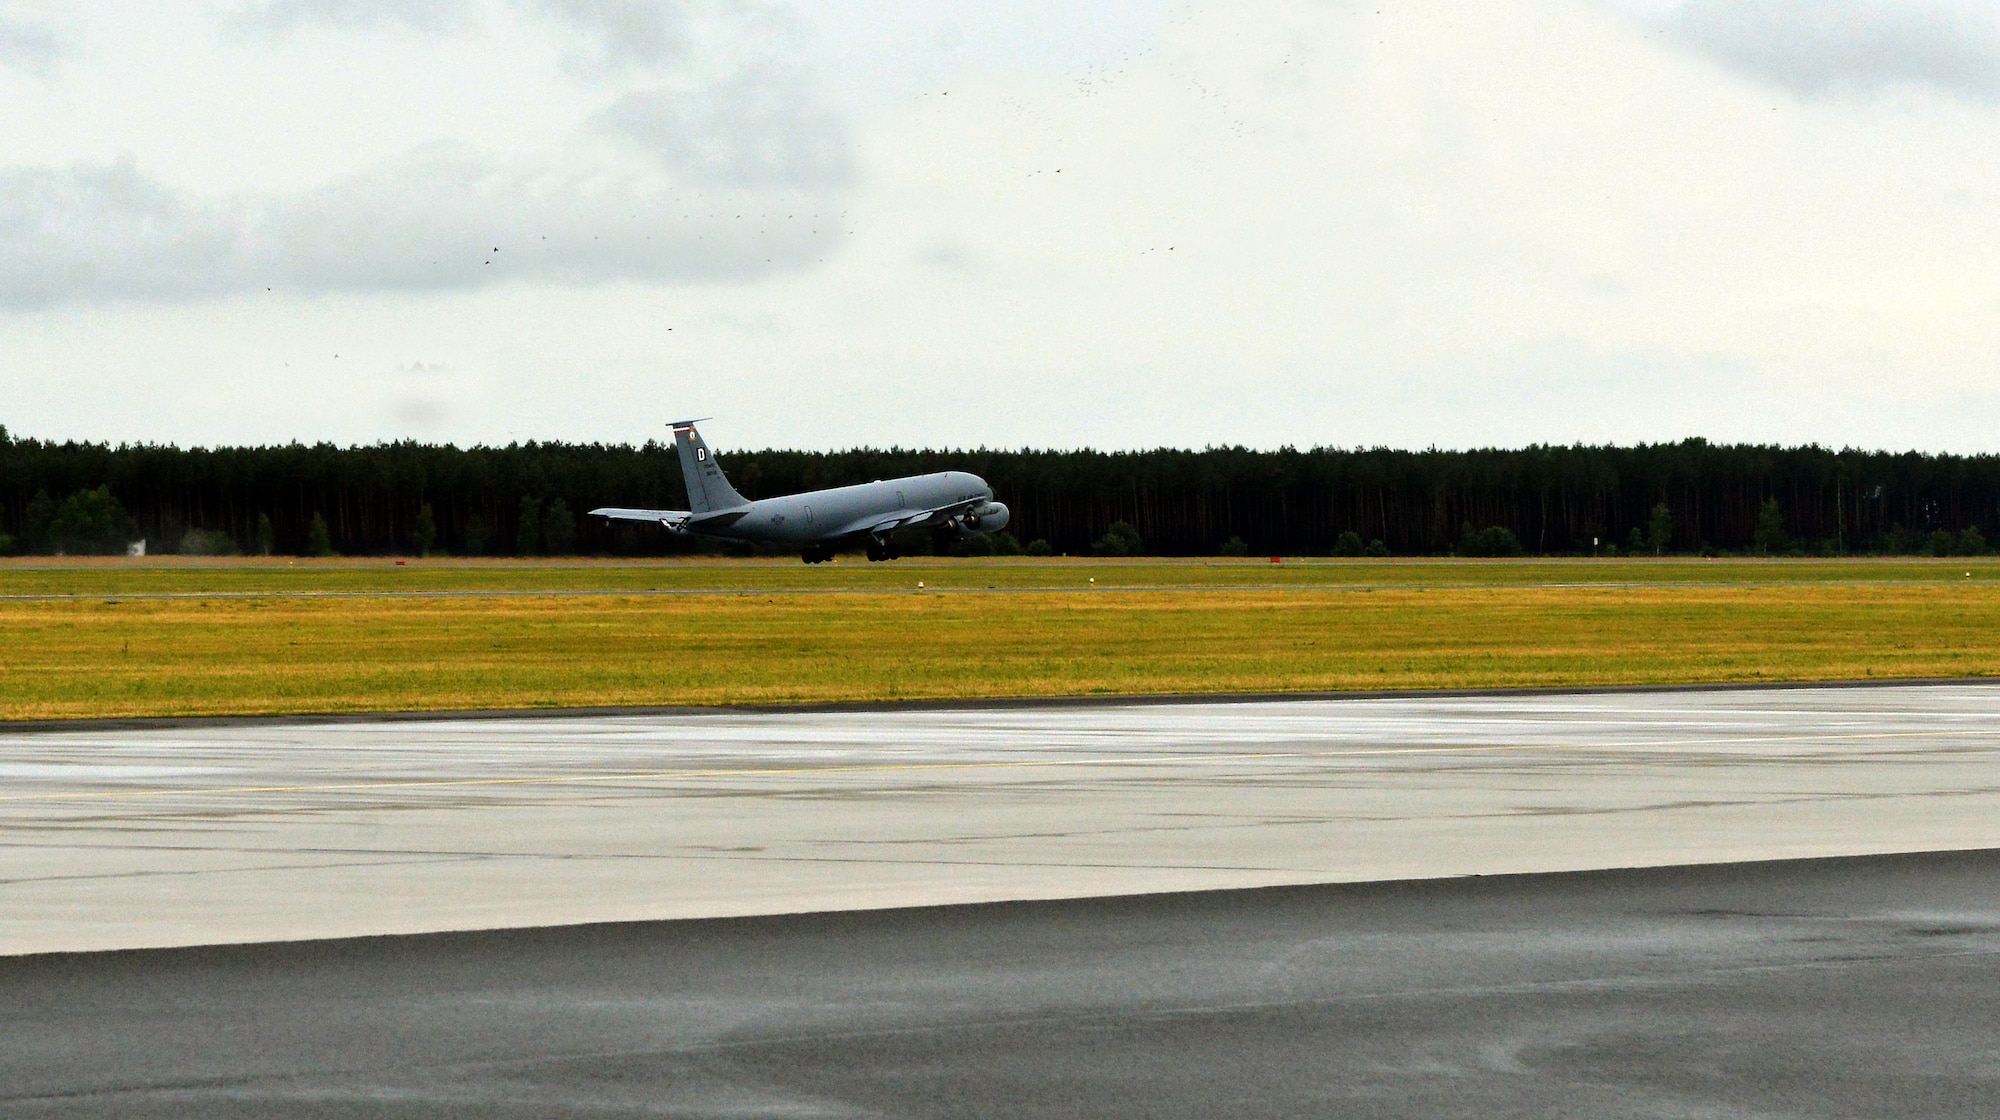 A KC-135 Stratotanker from the 507th Air Refueling Wing takes-off for a refueling mission as part of Baltic Operations 2015, June 9, 2015, at Powidz Air Base, Poland. In its 43rd iteration, BALTOPS is a multinational maritime exercise in Poland, Sweden, Germany, and throughout the Baltic Sea, including participation from 14 NATO and three partner nations June 5-20. (U.S. Air Force photo by Senior Airman Michael Battles)